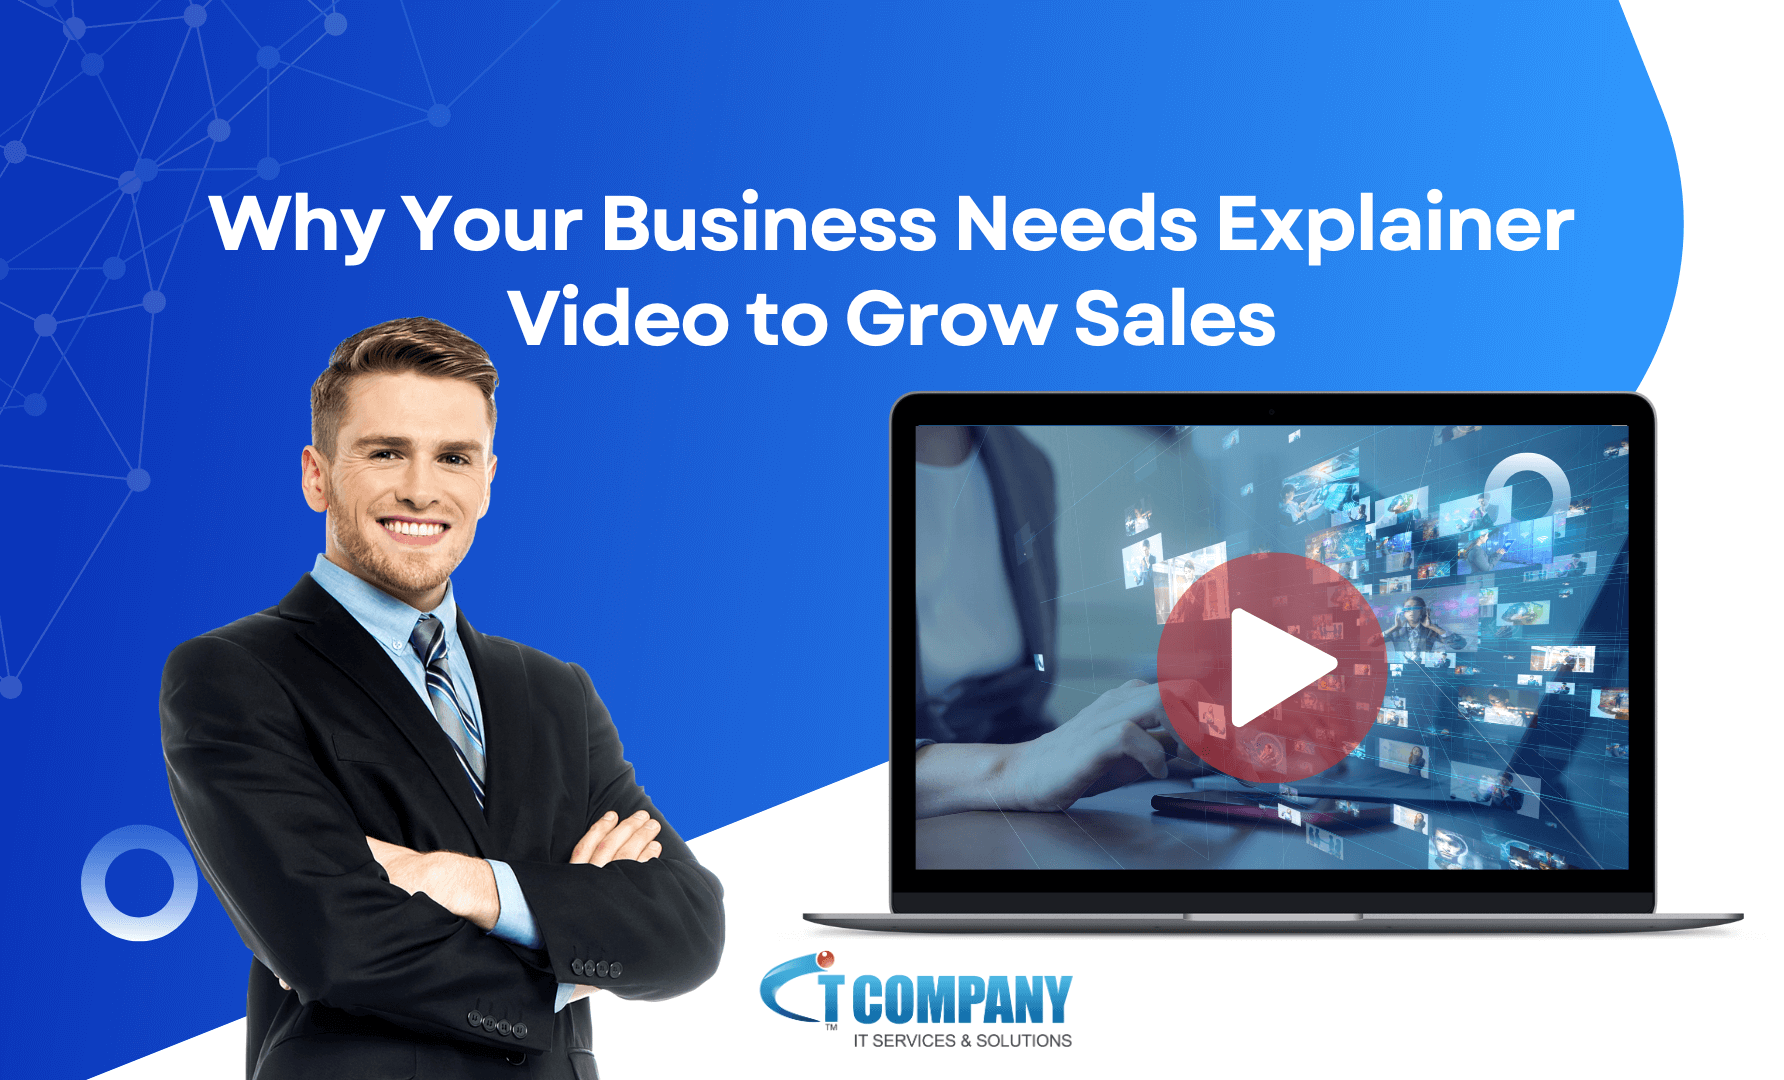 Why Your Business Needs Explainer Video to Grow Sales